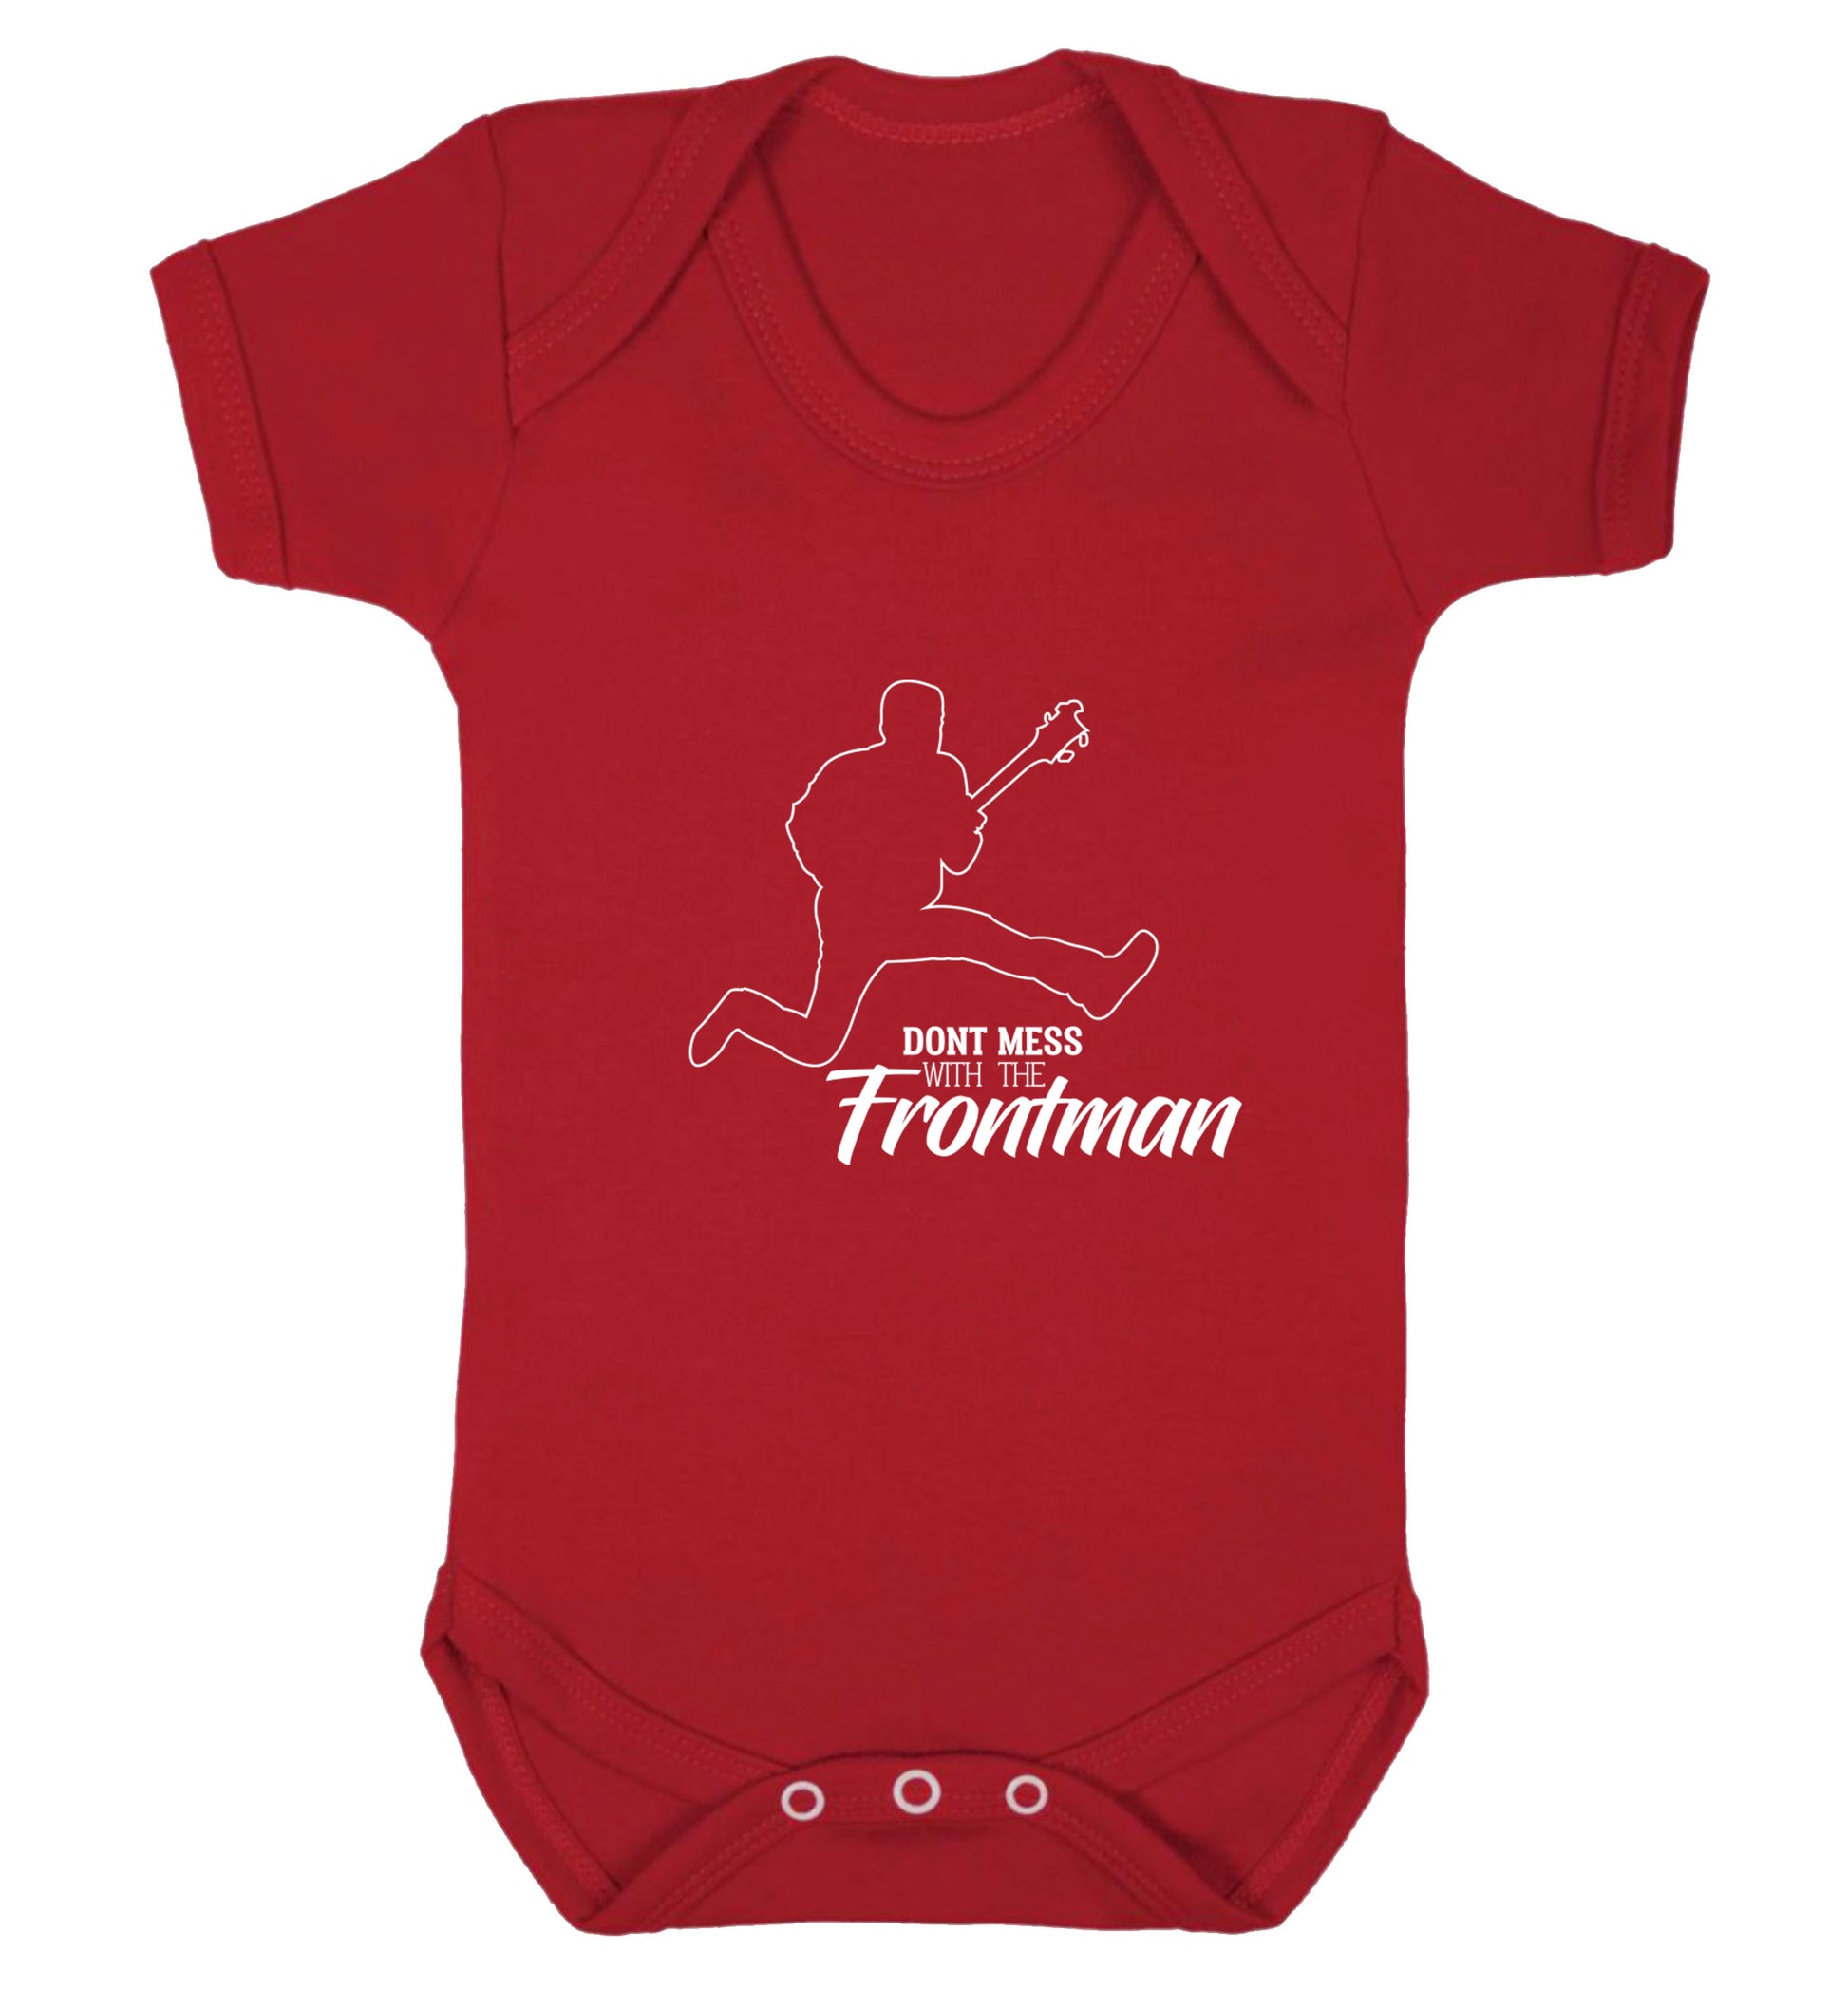 Don't mess with the frontman Baby Vest red 18-24 months